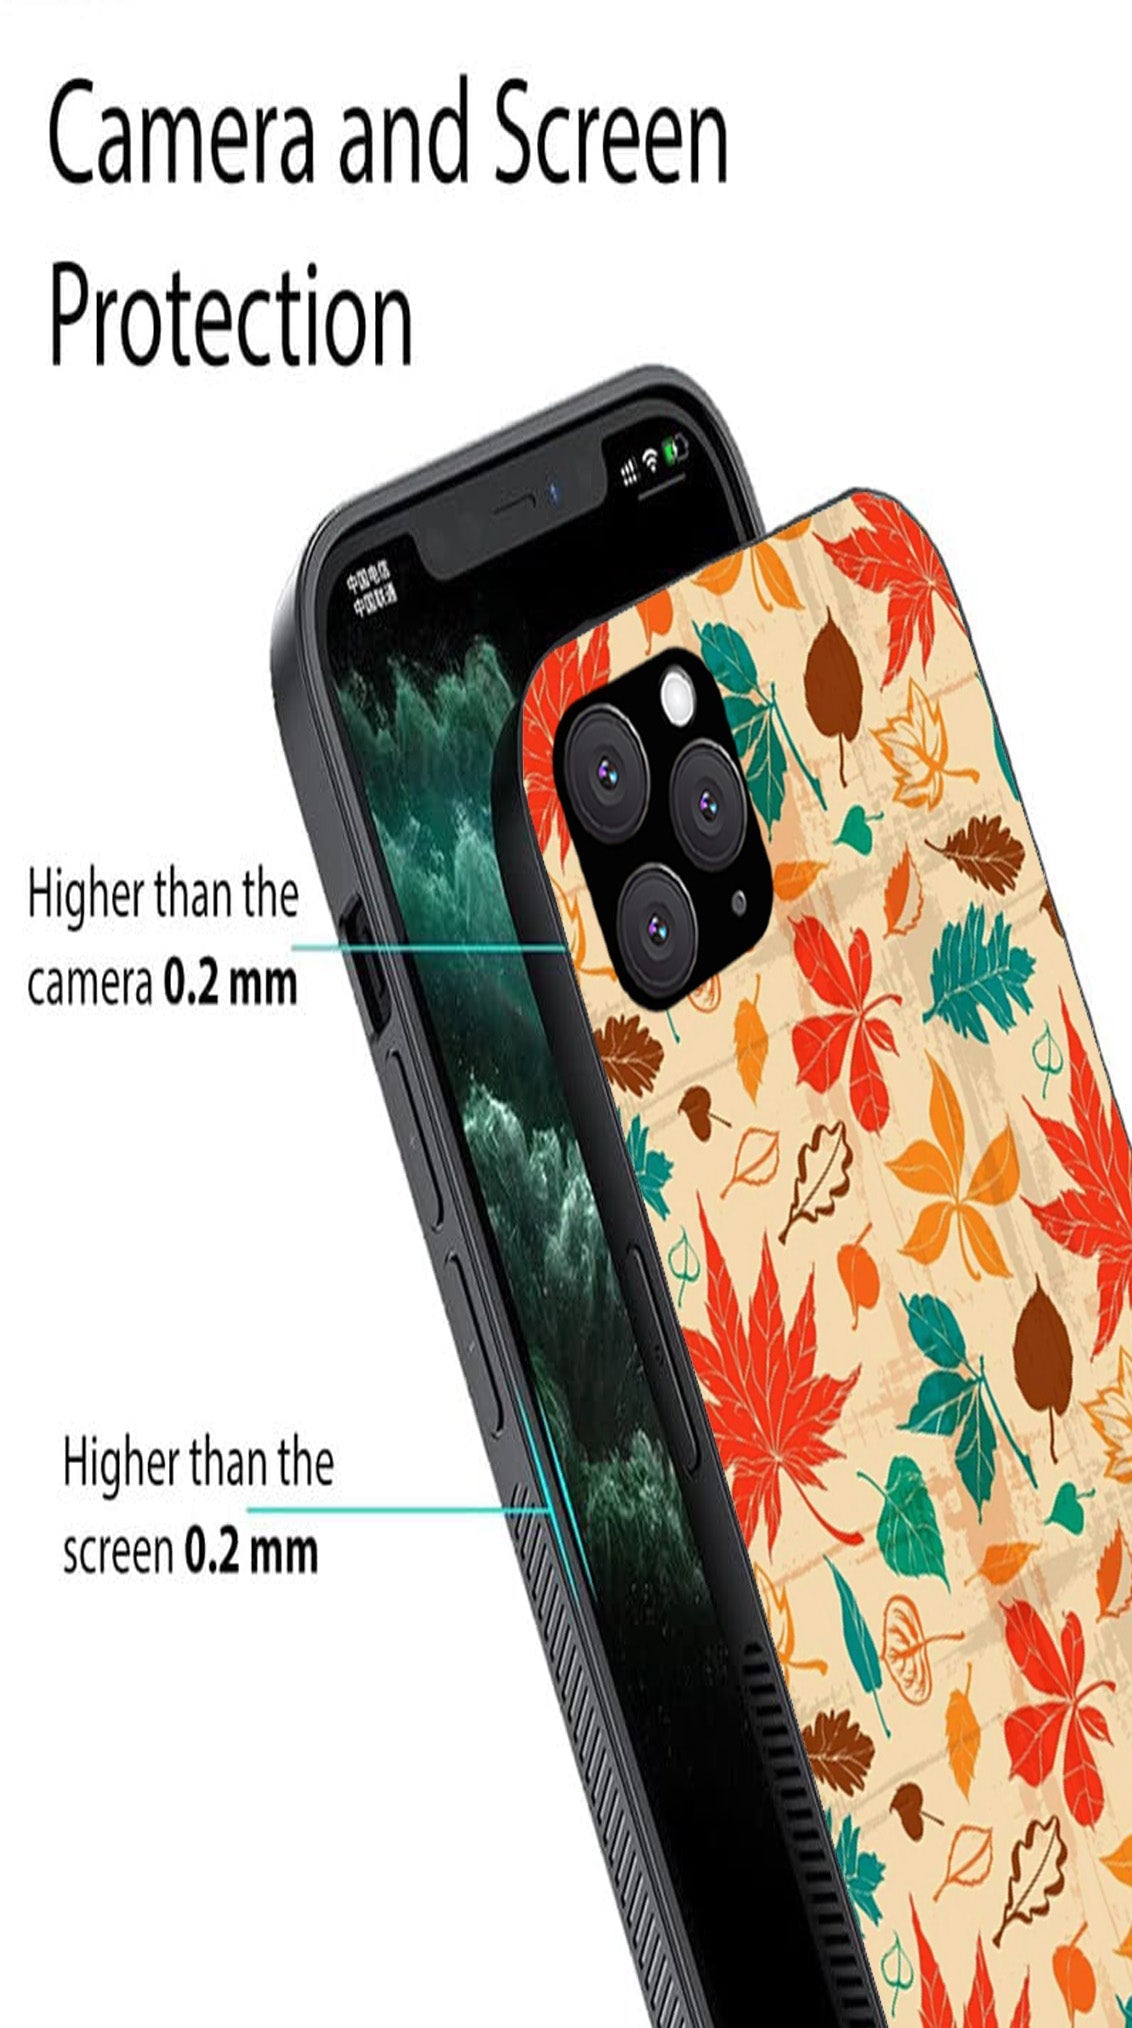 Leafs Design Metal Mobile Case for iPhone 11 Pro Max